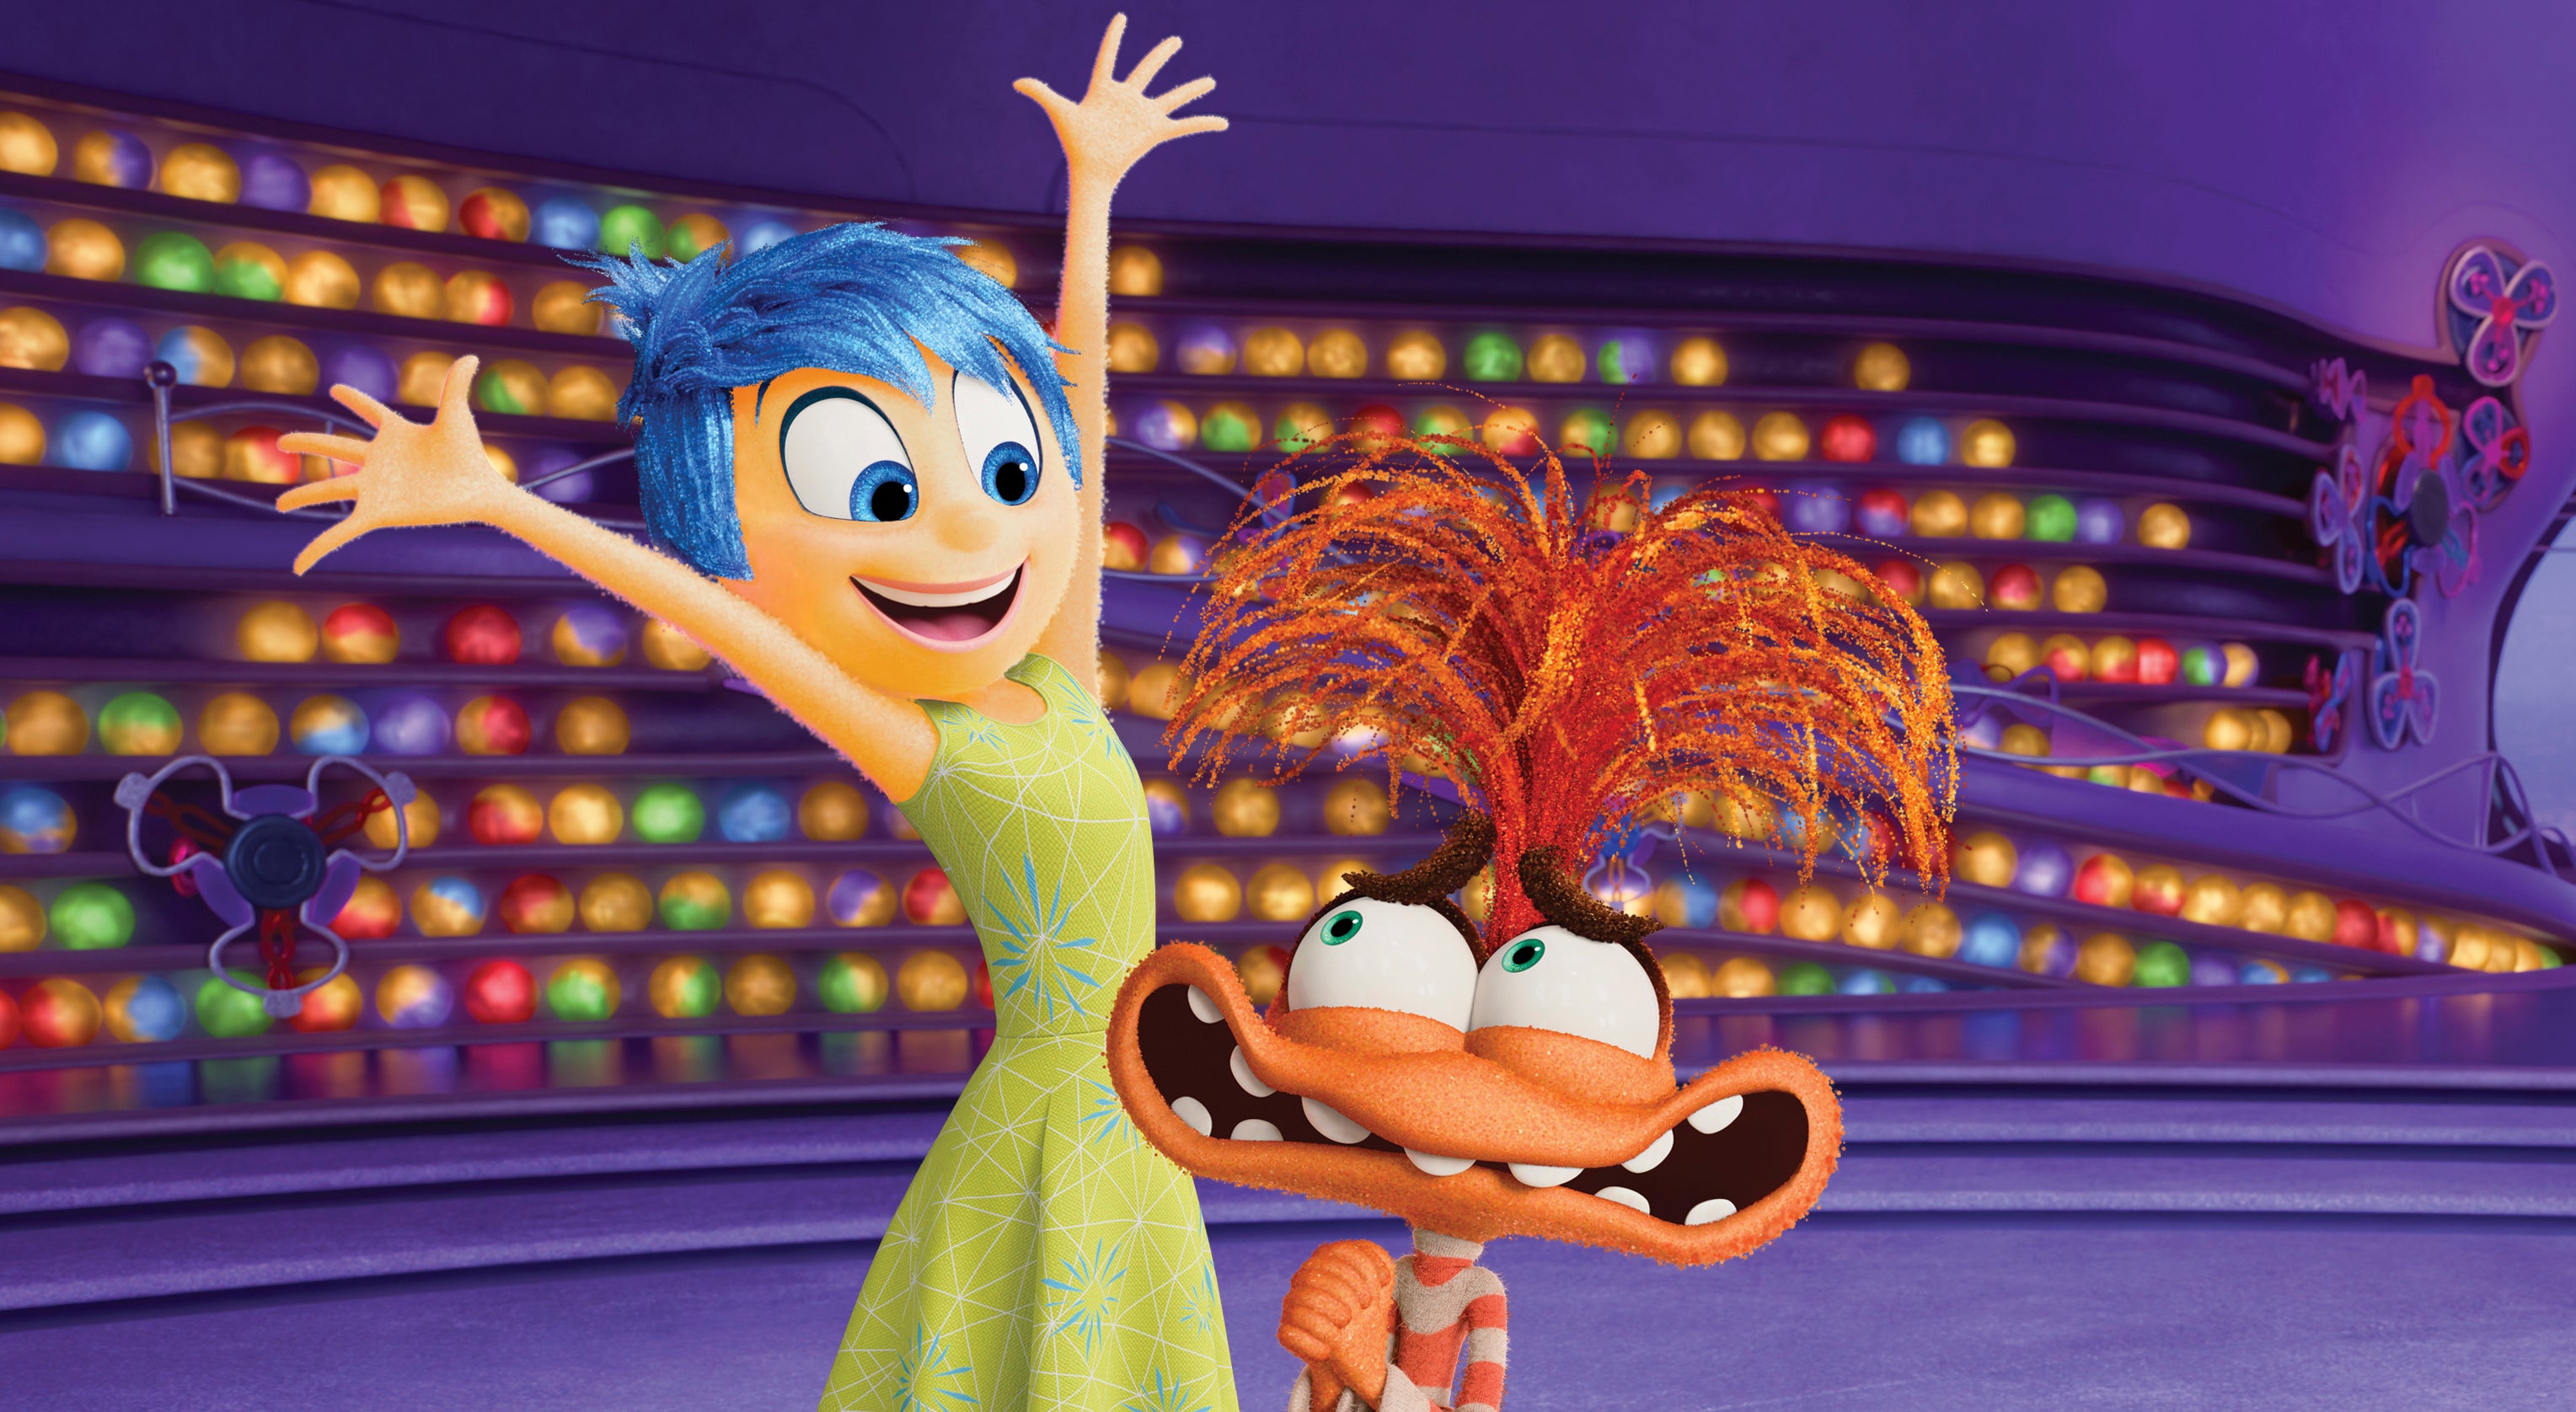 Inside Out 2 has experience huge success leading to an increased confidence among cinemas